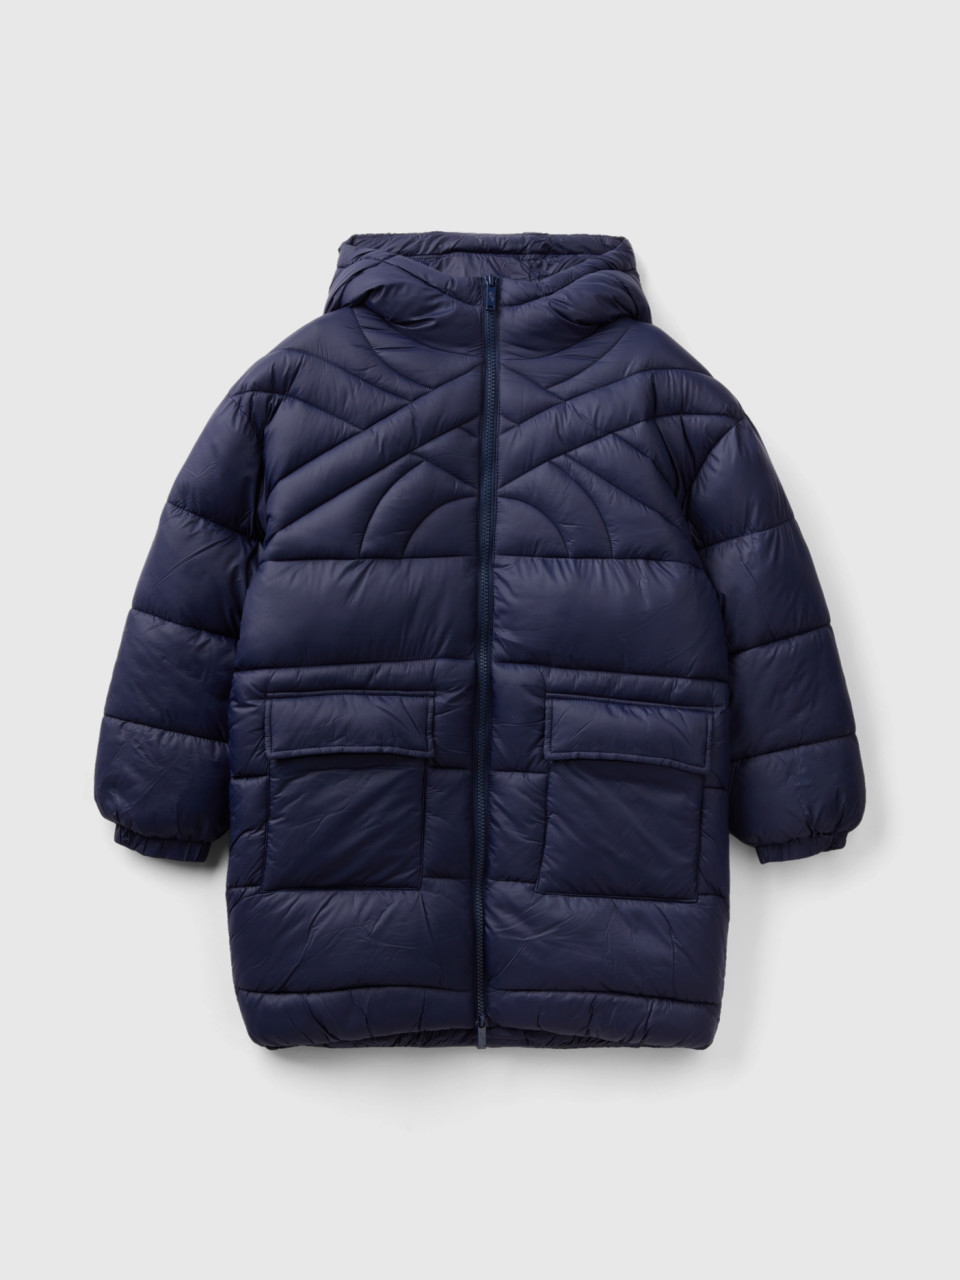 Benetton, Long Padded Jacket With Recycled Wadding, Dark Blue, Kids